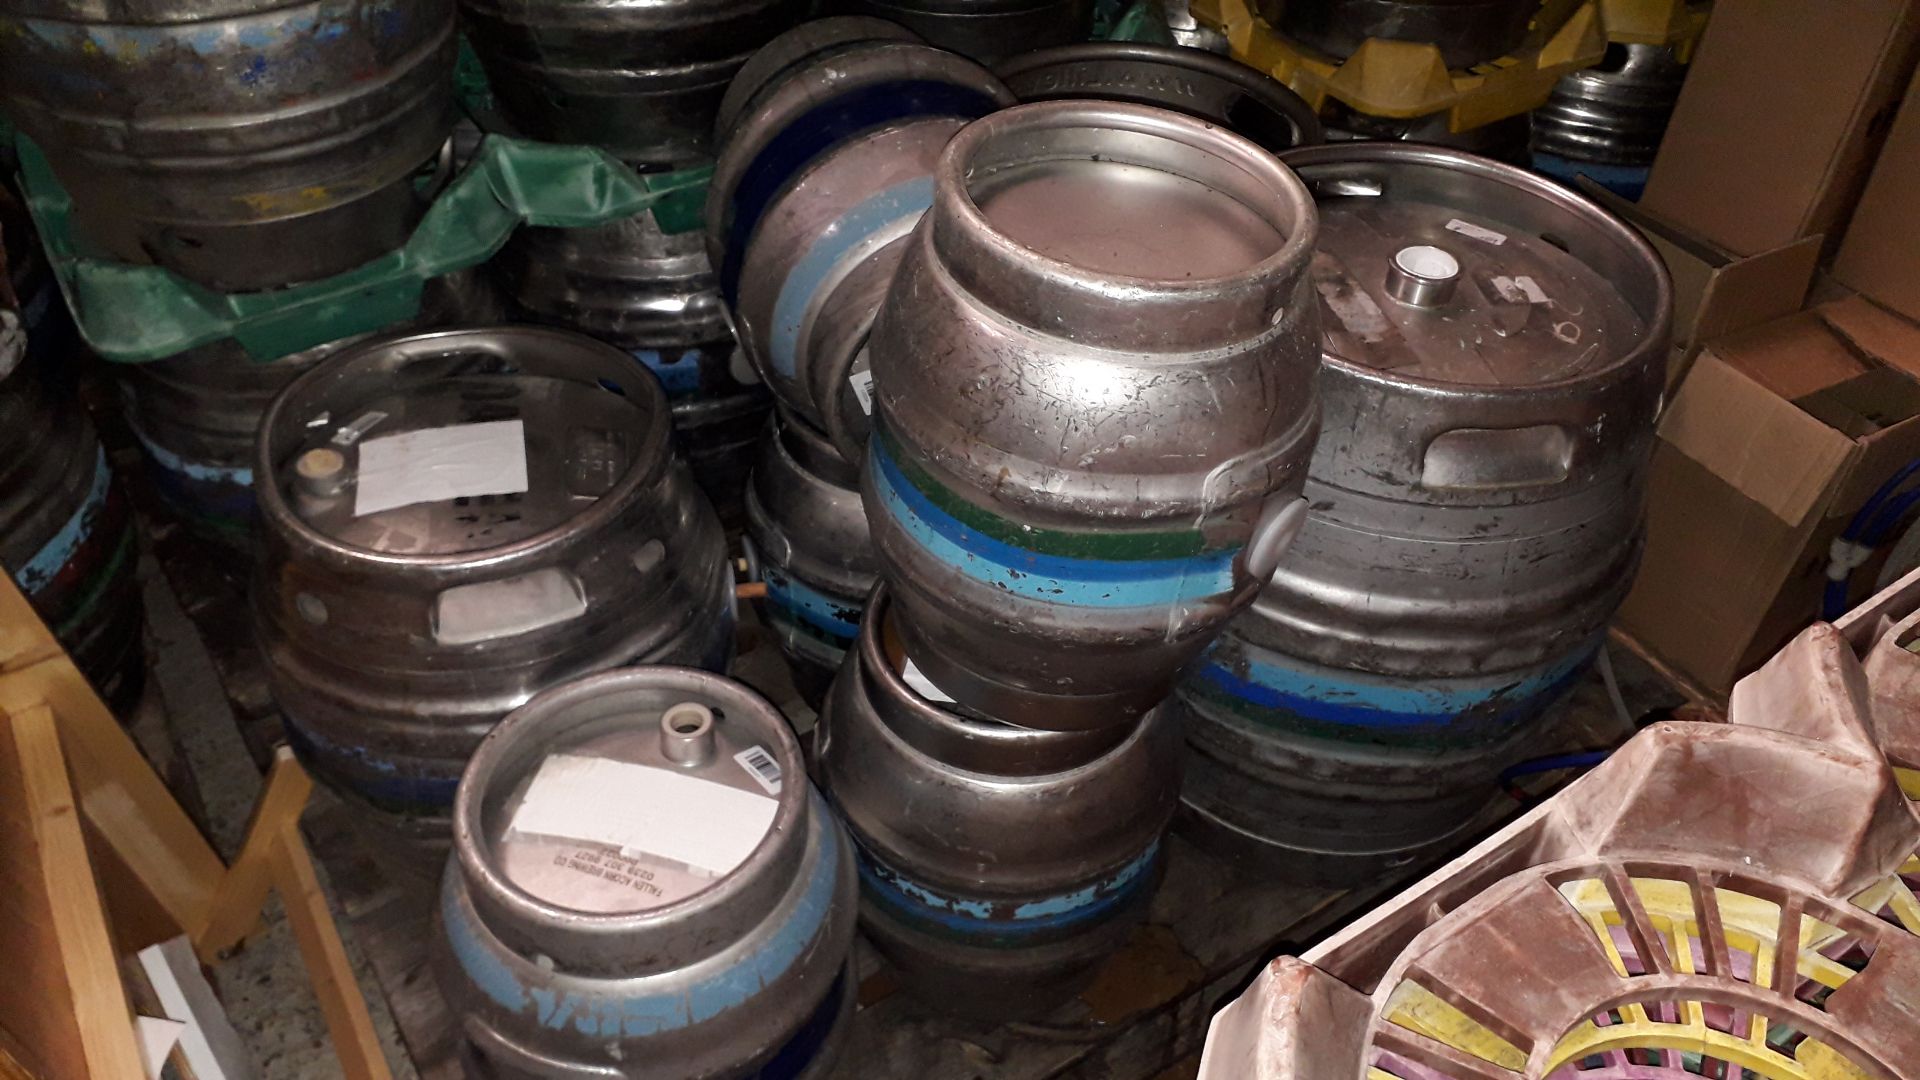 Approx. 110 x 9 Gallon Stainless Steel Beer Kegs and Quantity of Keg Pallets - Image 4 of 4